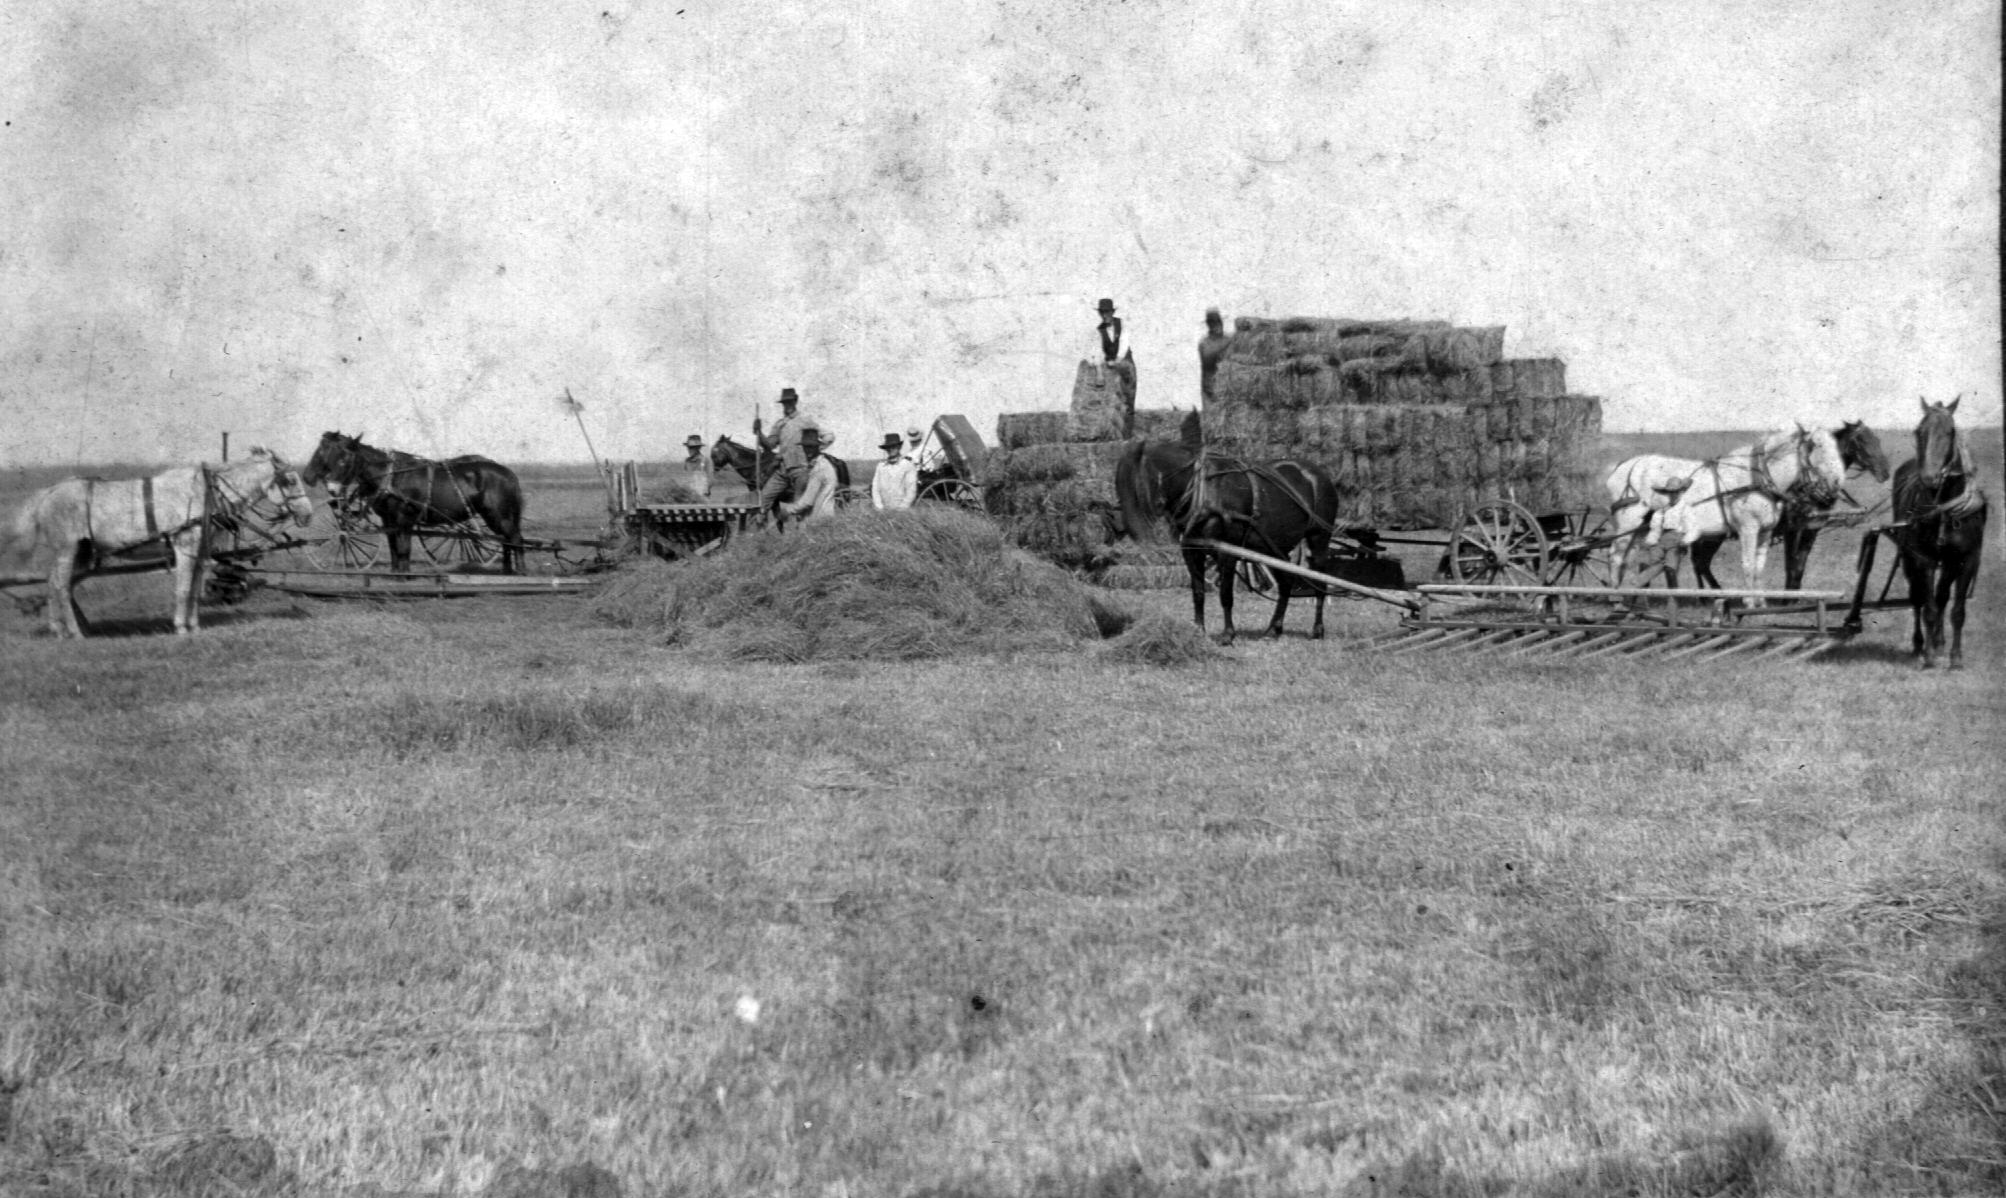 Haying on the Ray Noyes Farm in Liberal, Missouri